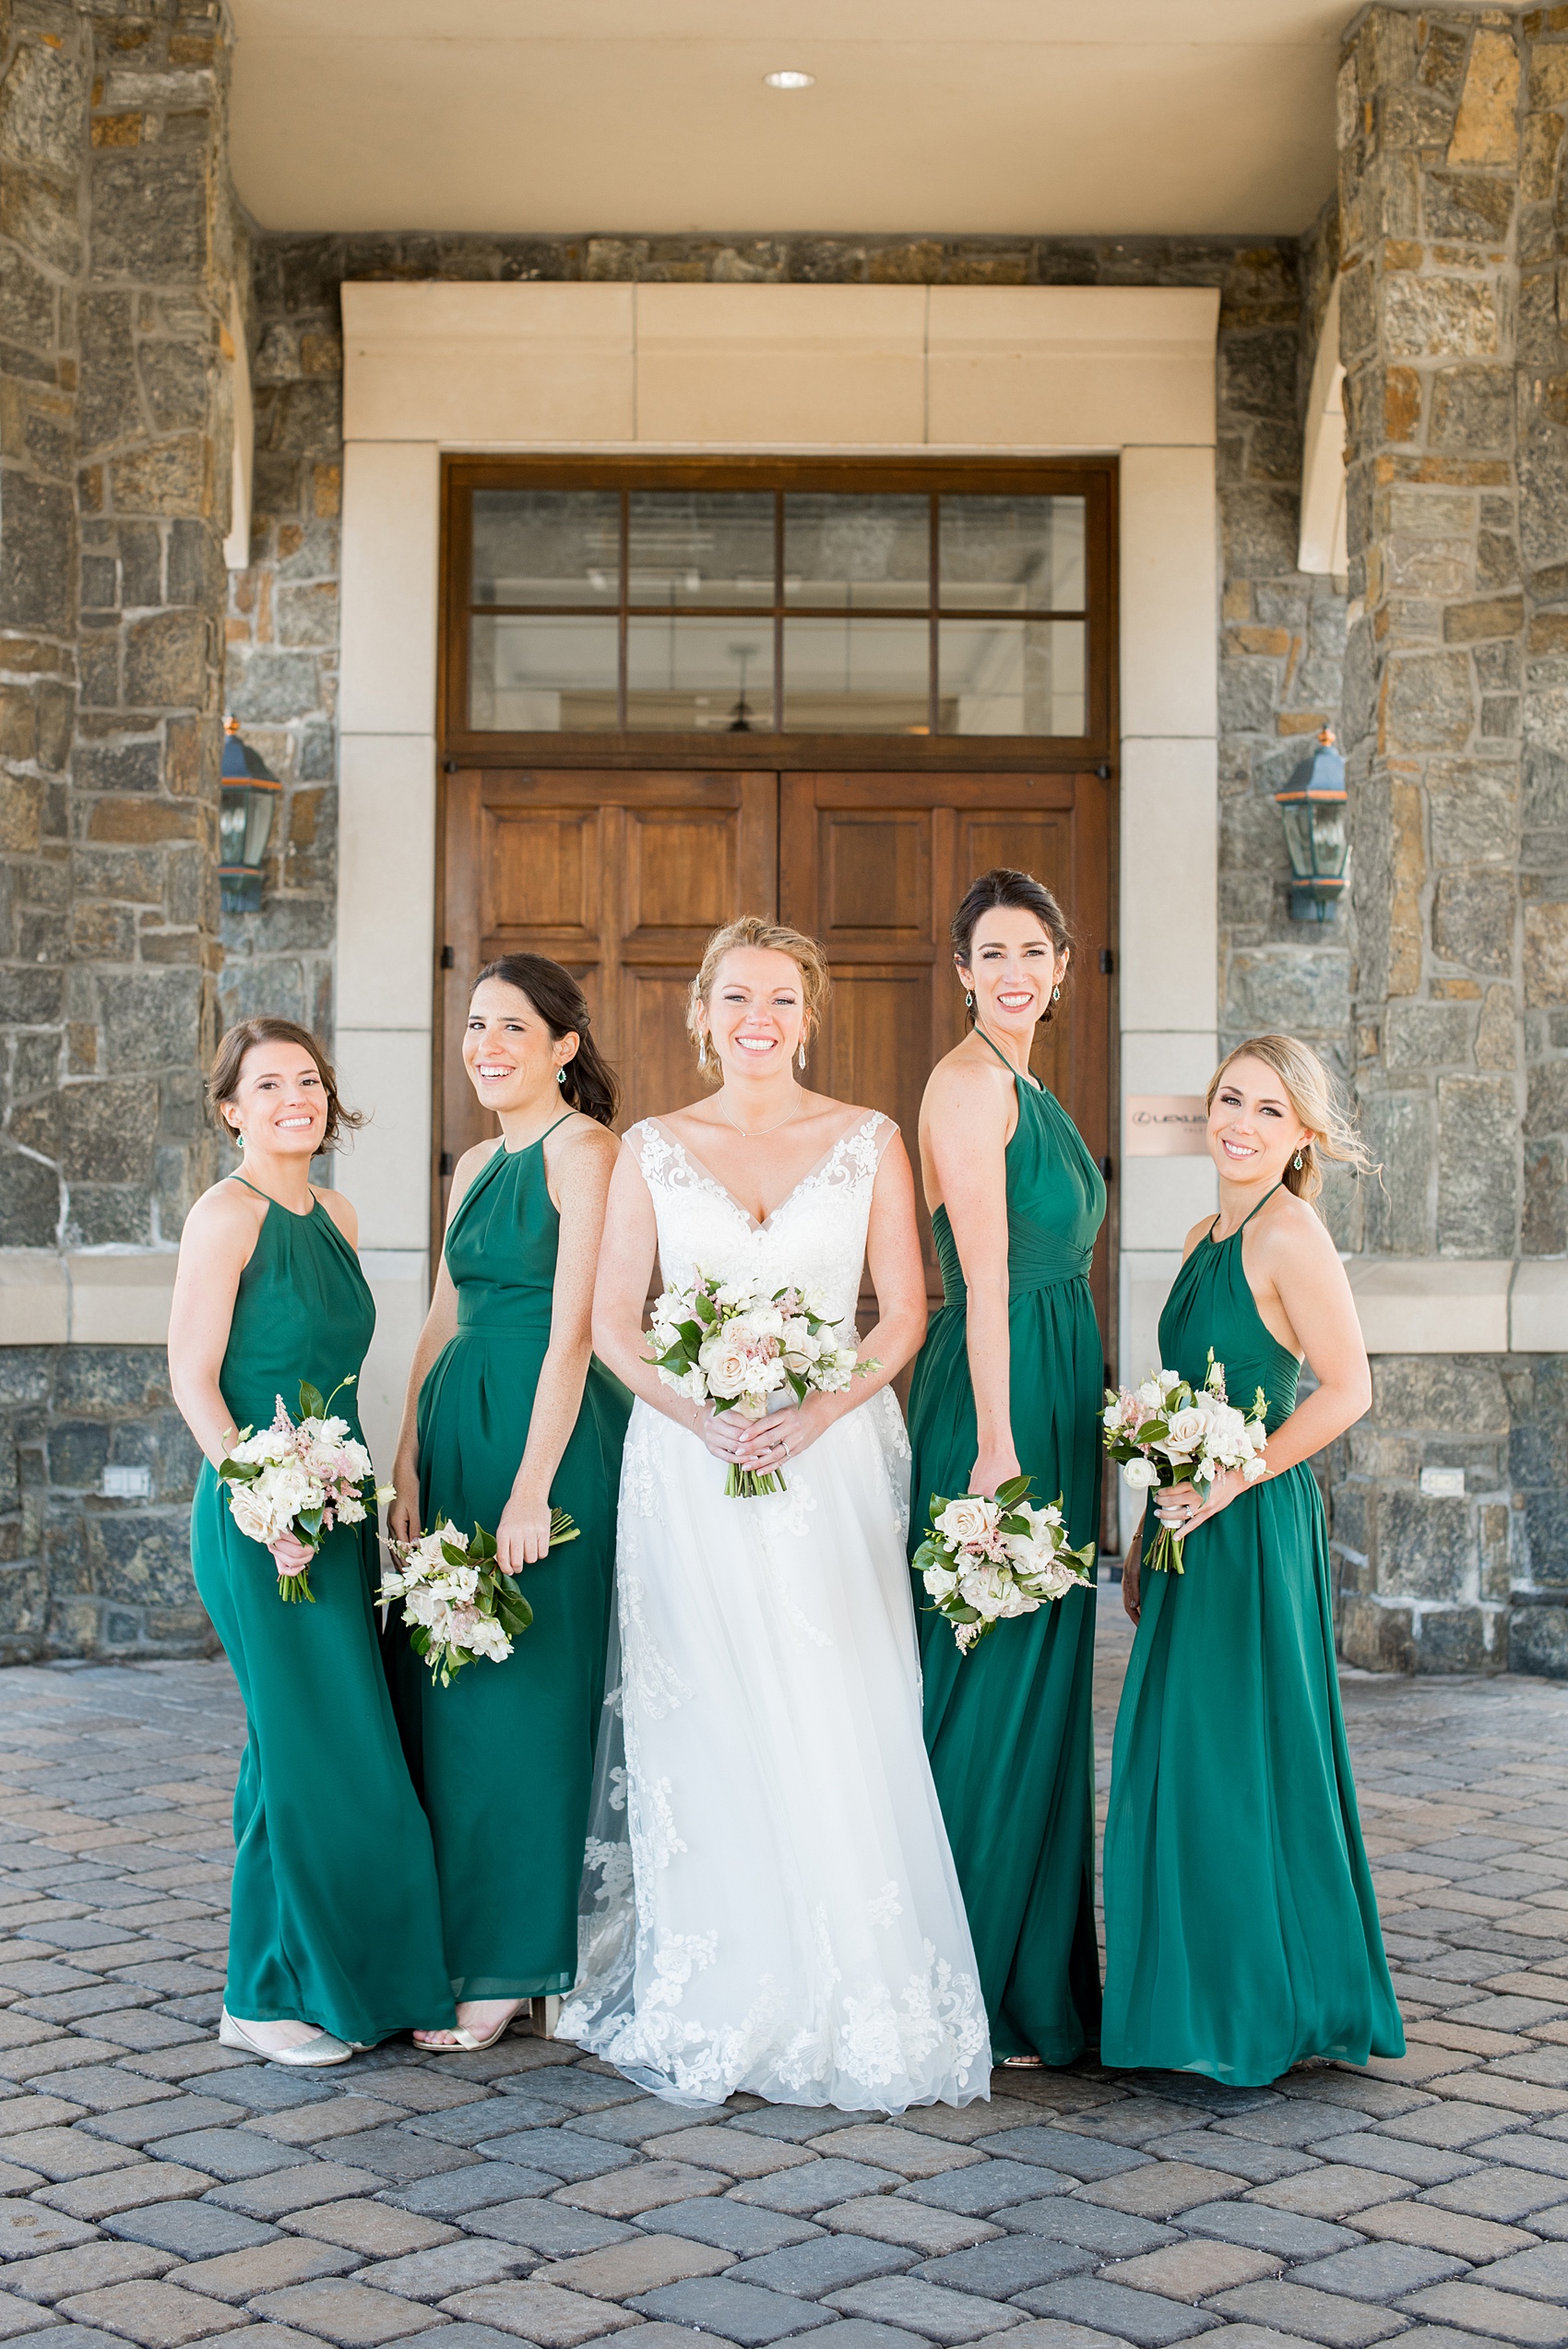 Saratoga Springs destination wedding photos by Mikkel Paige Photography. The bridesmaids wore green gowns and held white and pink bouquets with roses and astilbe at Saratoga National Golf Club venue for a spring celebration. #SaratogaSpringsNY #SaratogaSprings #mikkelpaige #NYwedding #destinationwedding 